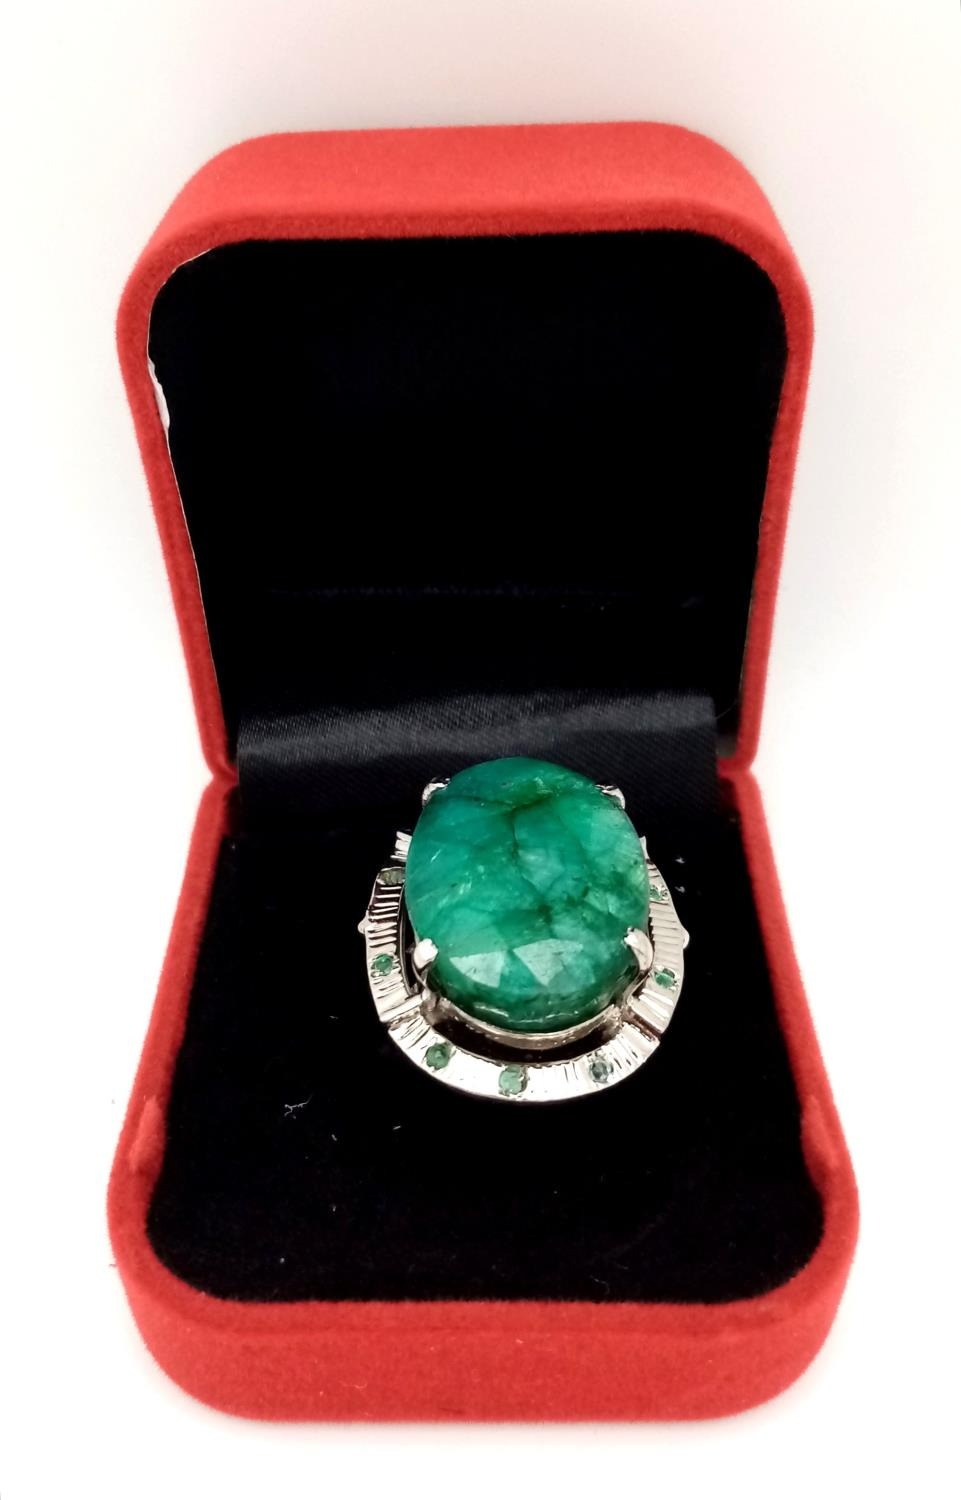 A 48ct Brazilian Emerald Silver Ring. Set in 925 Sterling Silver. W- 17.5g. Comes in a - Image 5 of 6